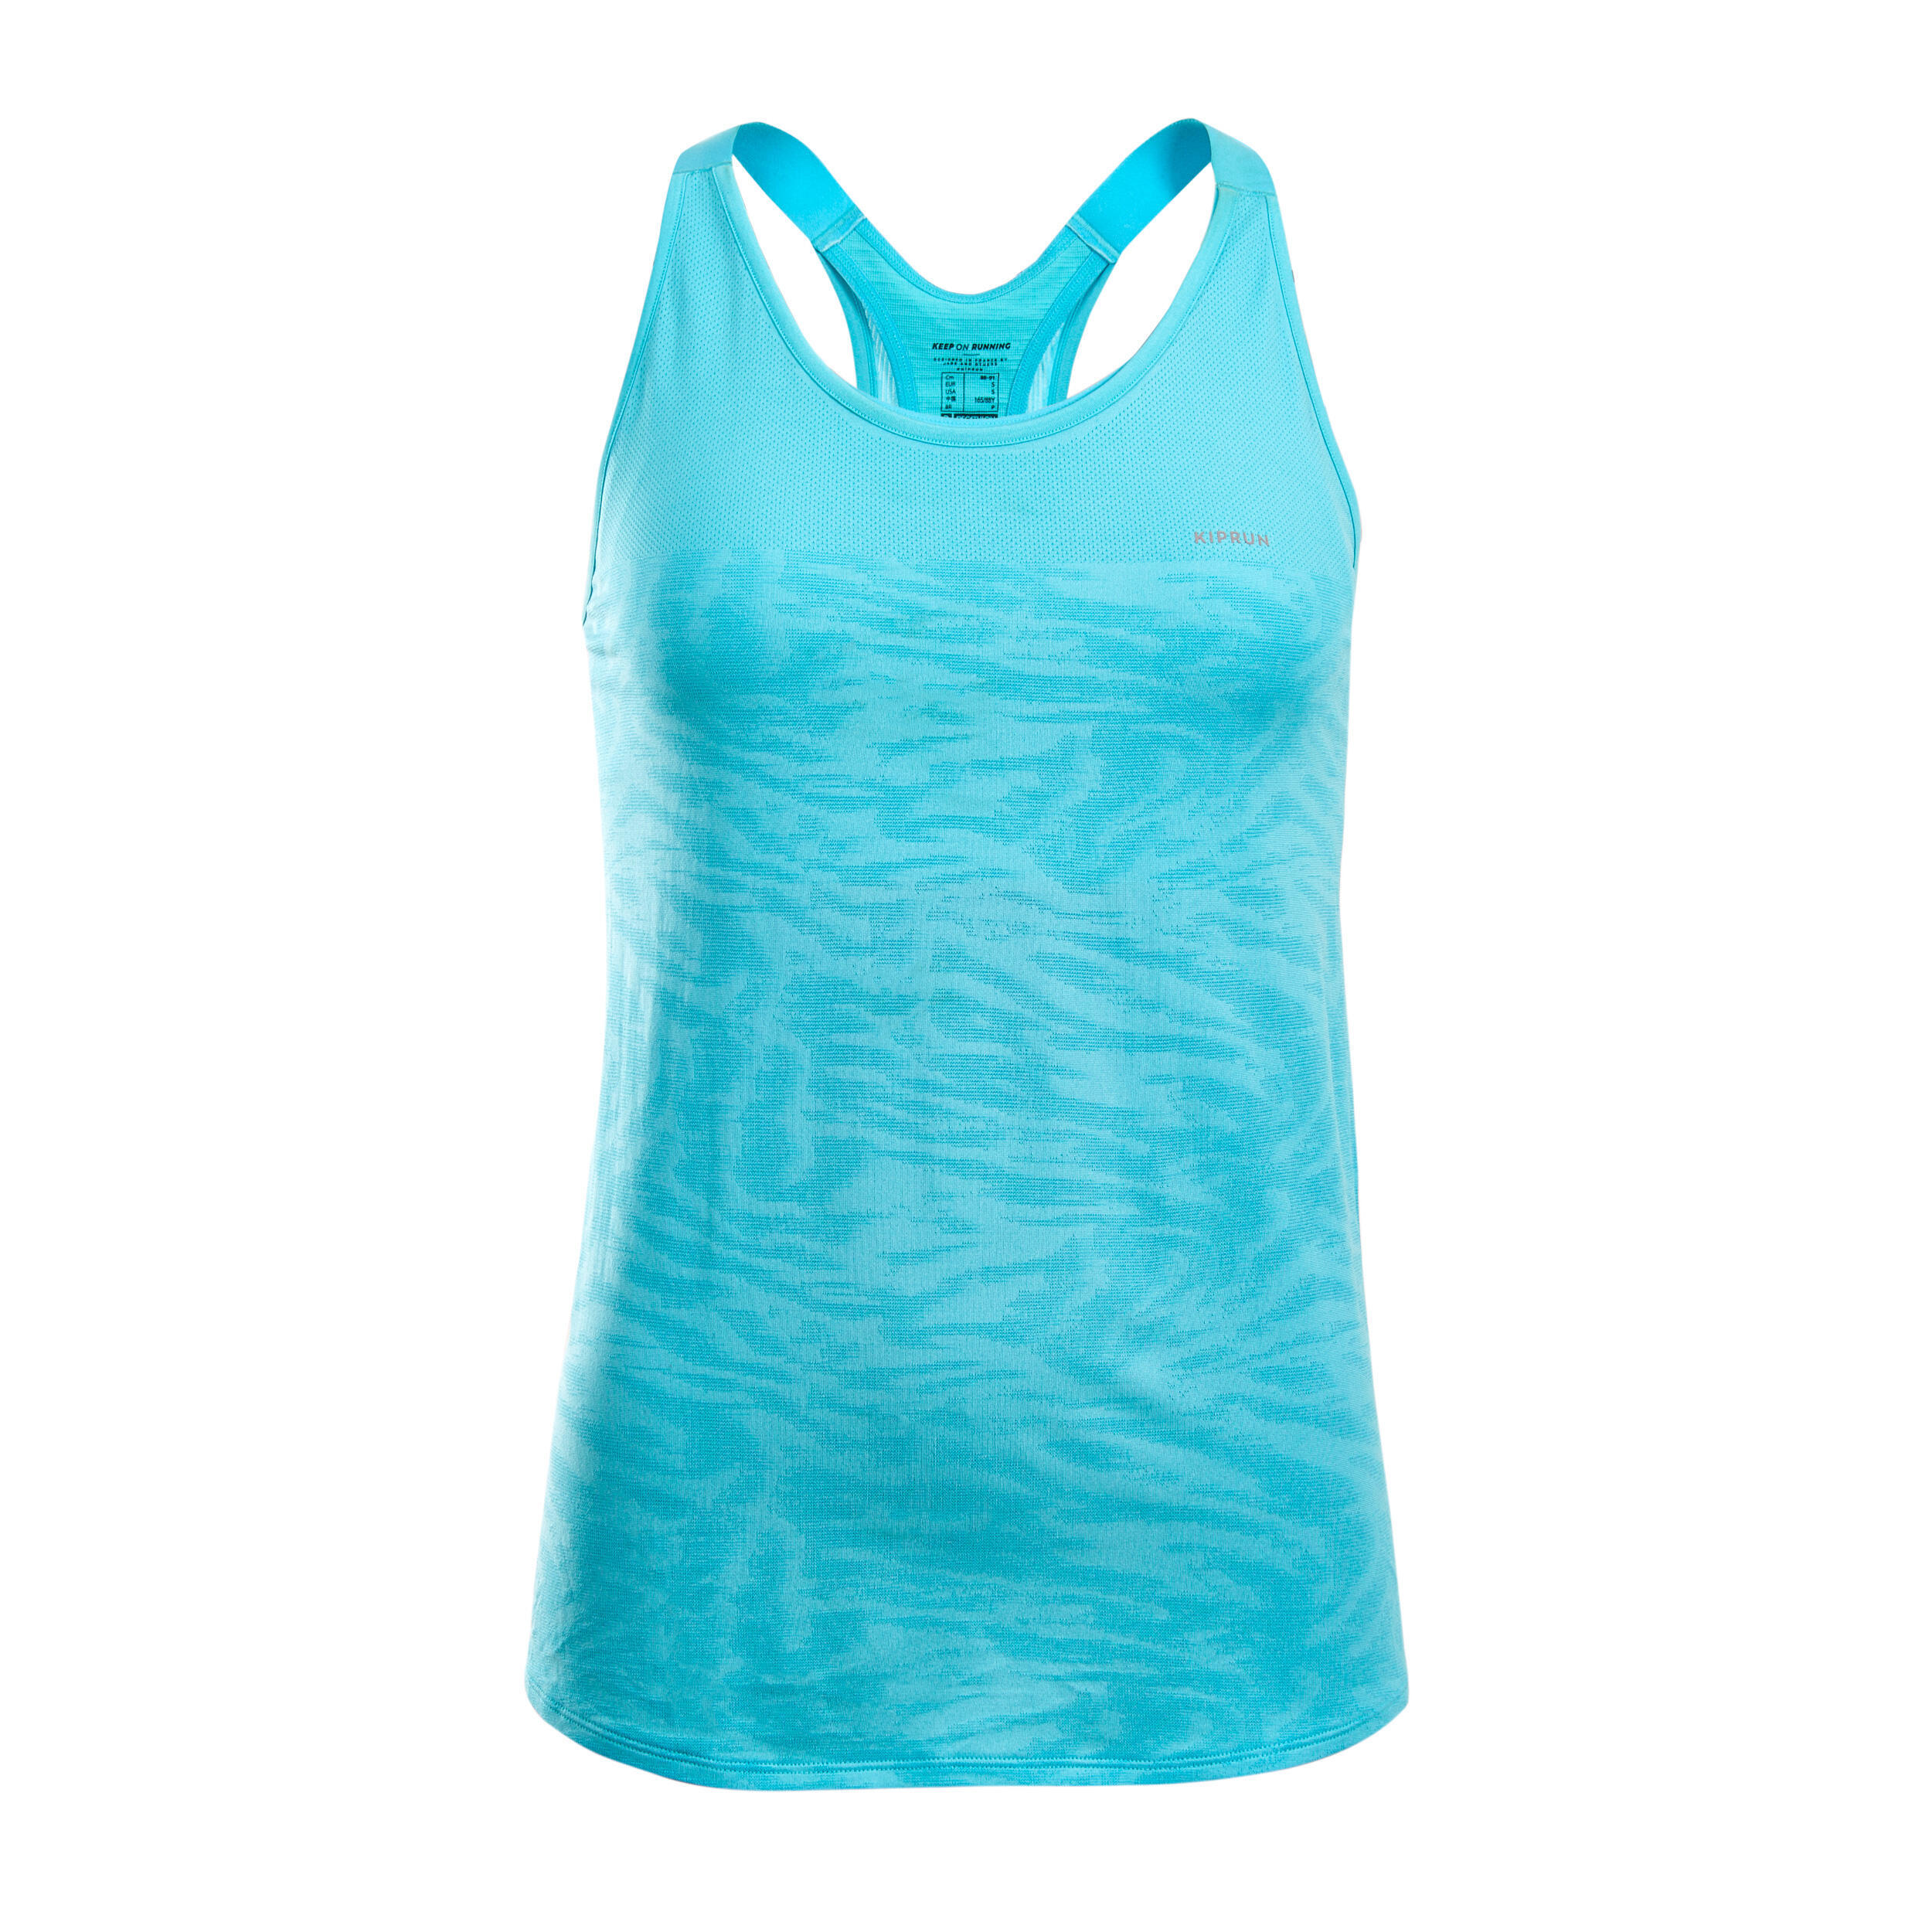 Refurbished Womens Running Tank Top with Built-in Bra - A Grade 1/7